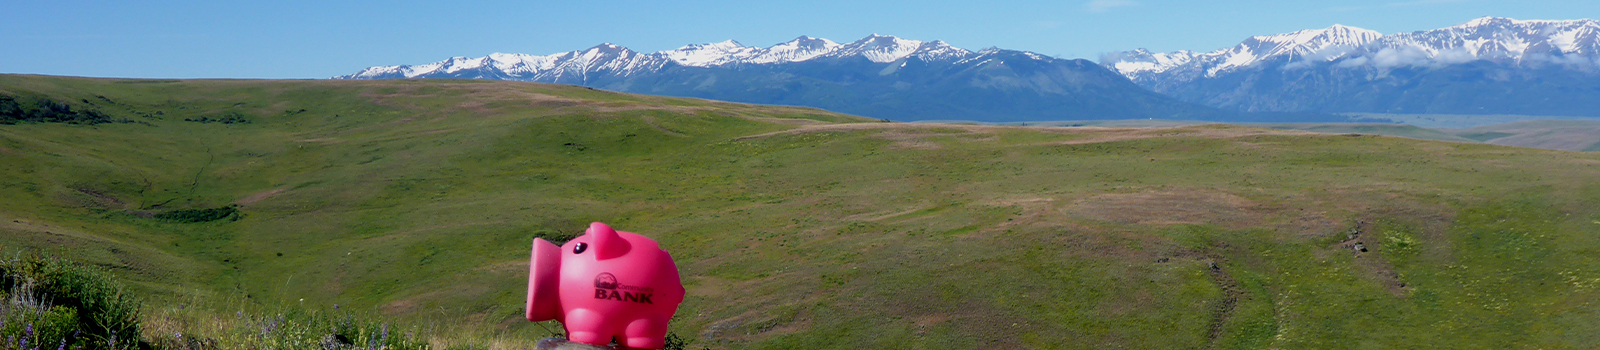 Piggy bank in front of snowy mountains